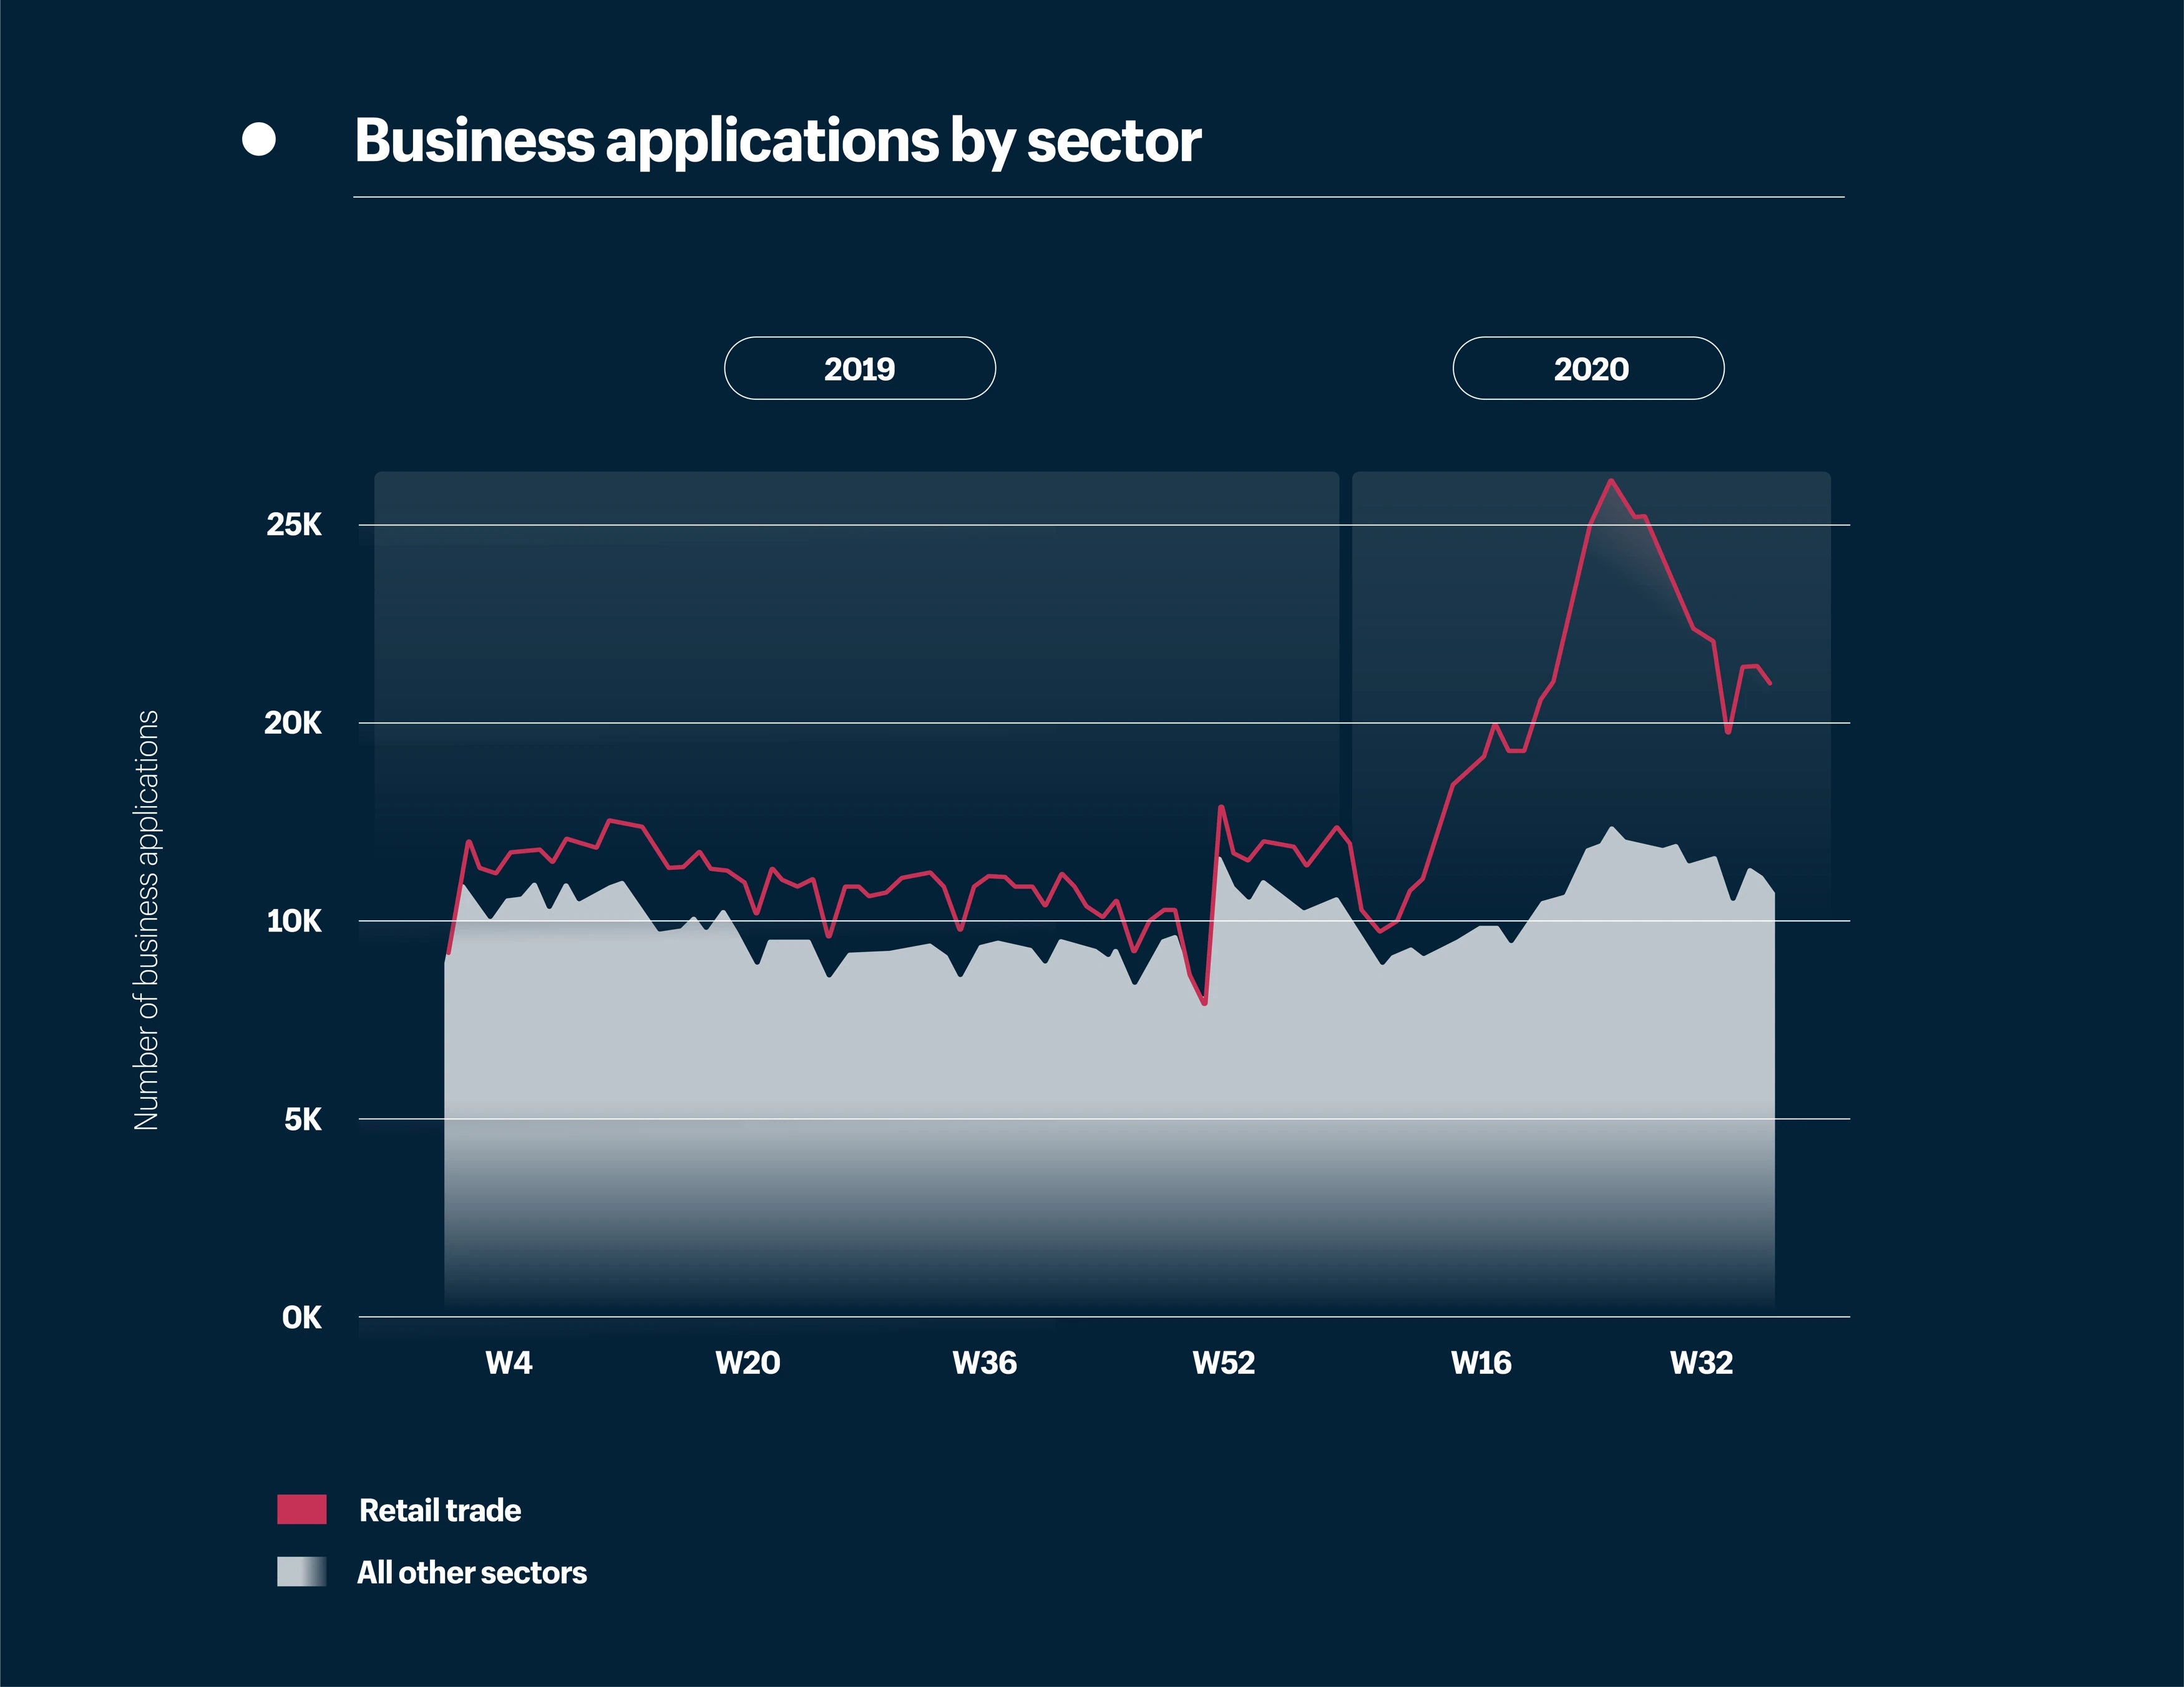 Data visualization showing business applications by sector